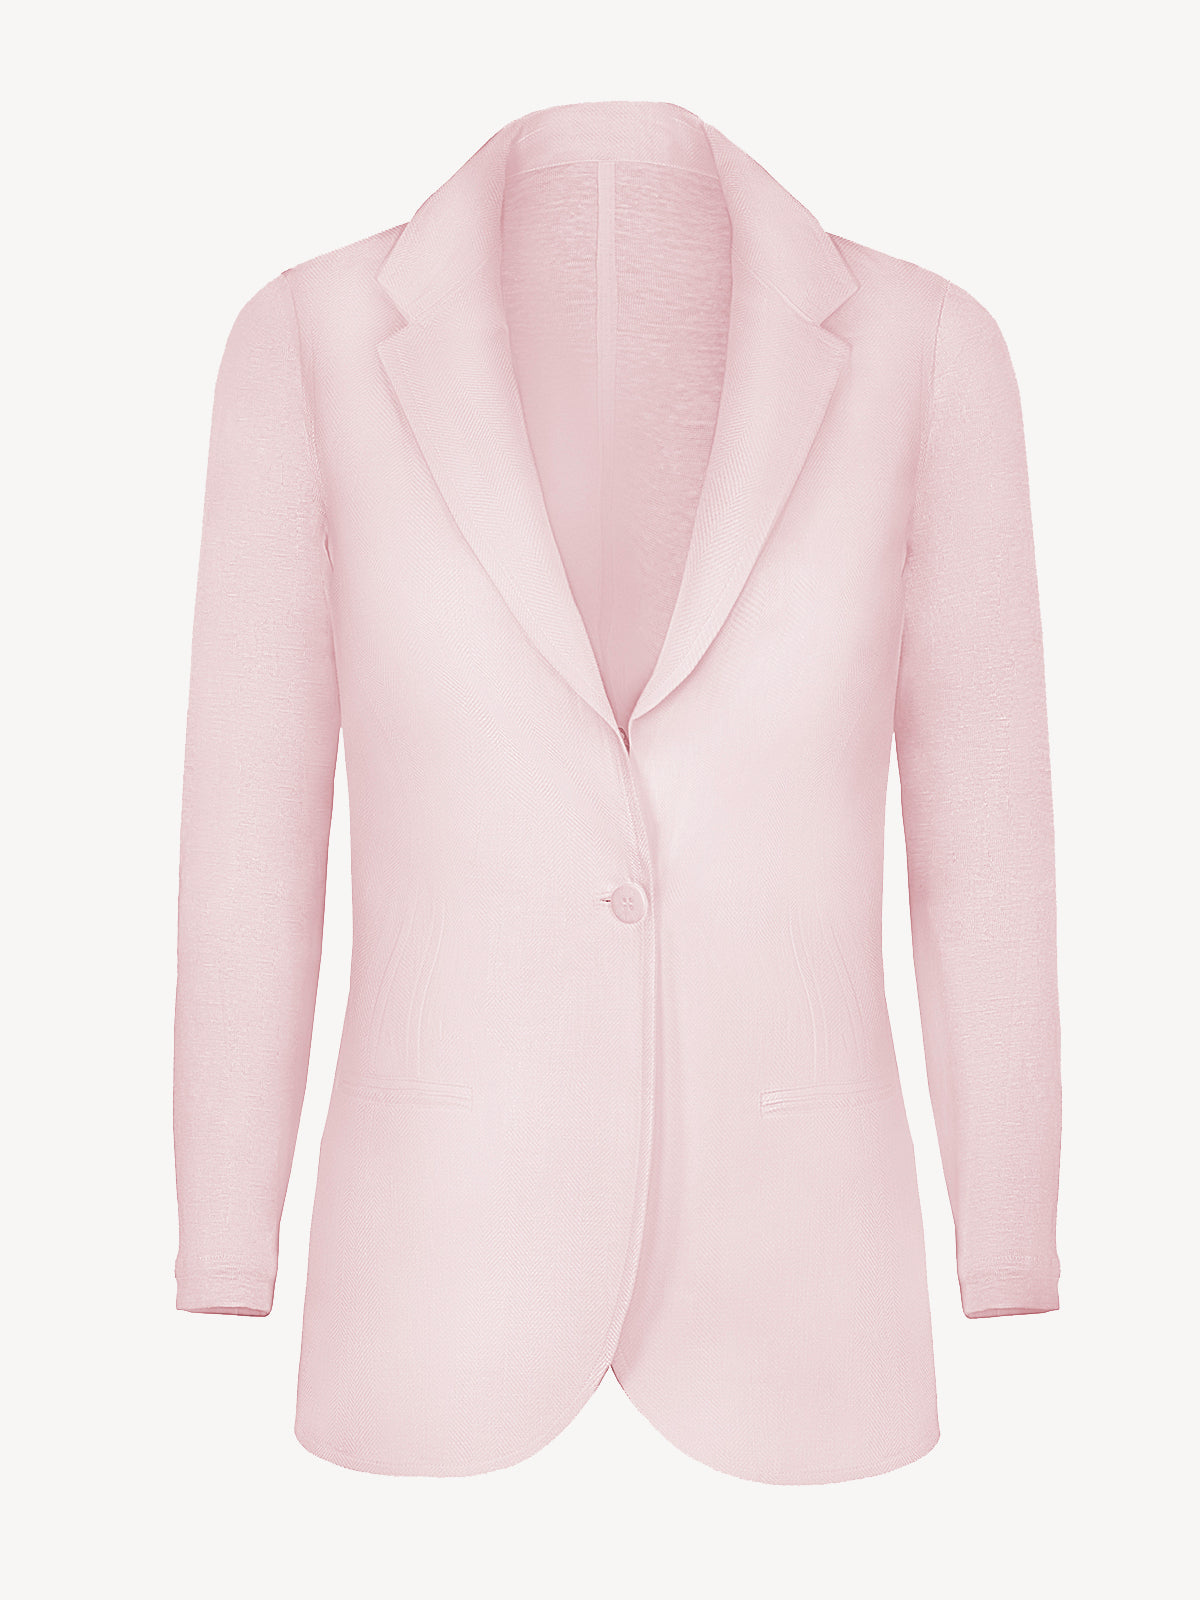 Giacca Sud Woman 100% Capri pink linen jacket front